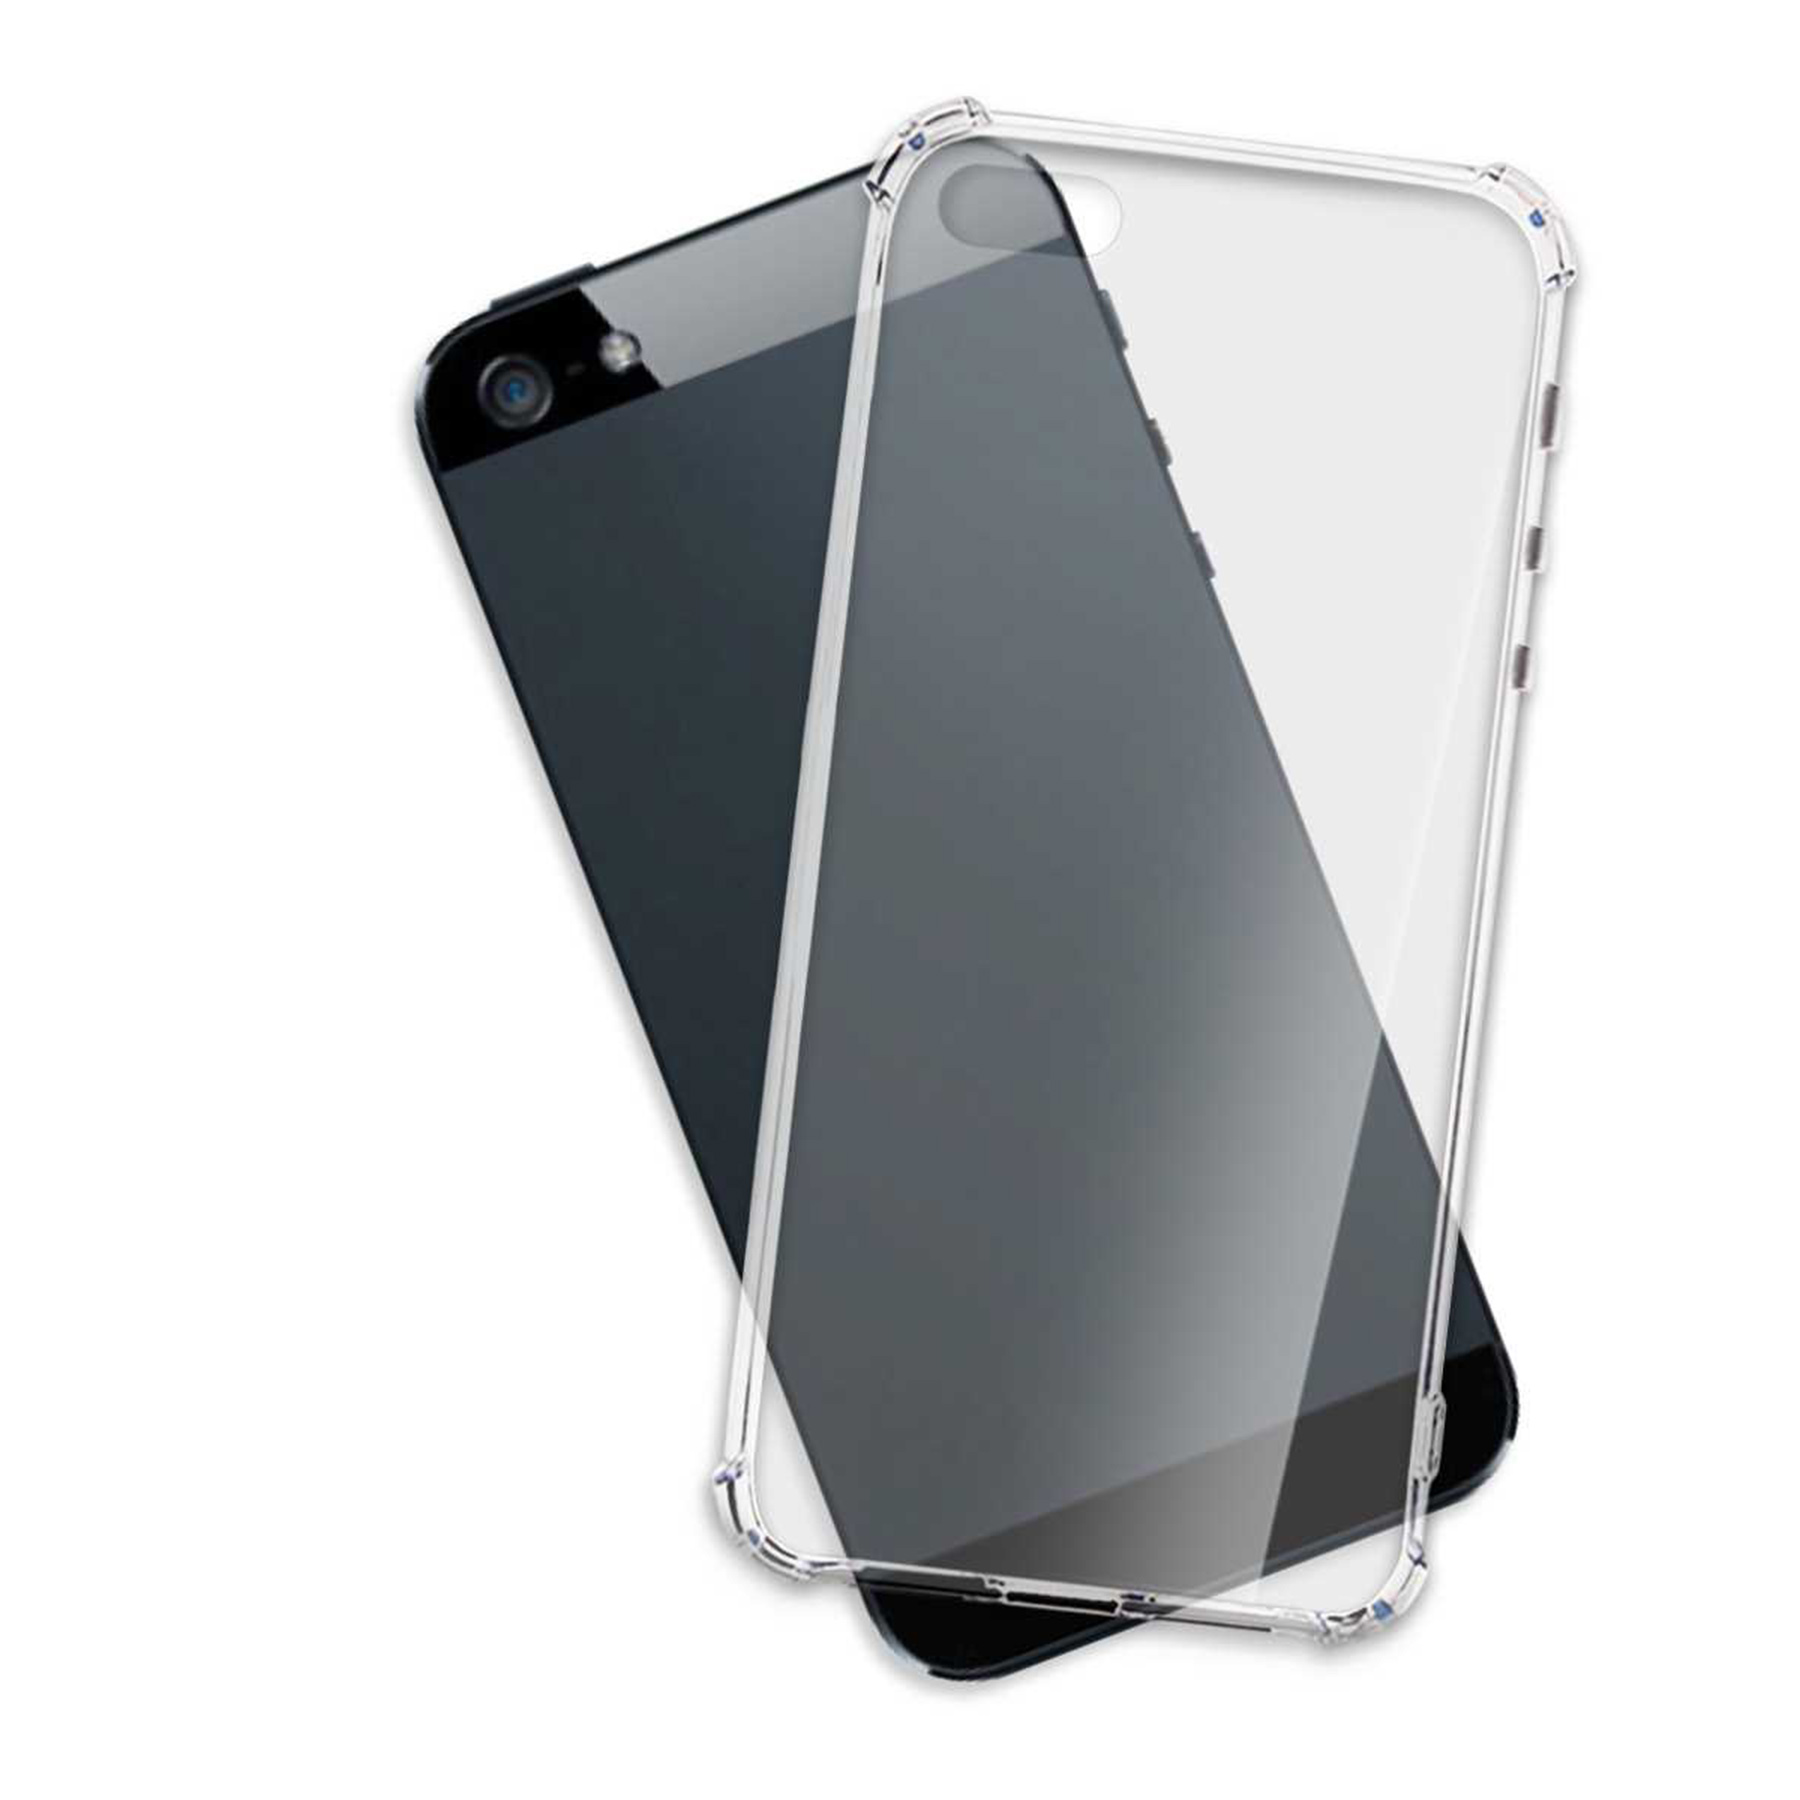 Backcover, iPhone 5, MORE iPhone 5s, Clear Case, MTB Armor Transparent ENERGY iPhone SE, Apple,